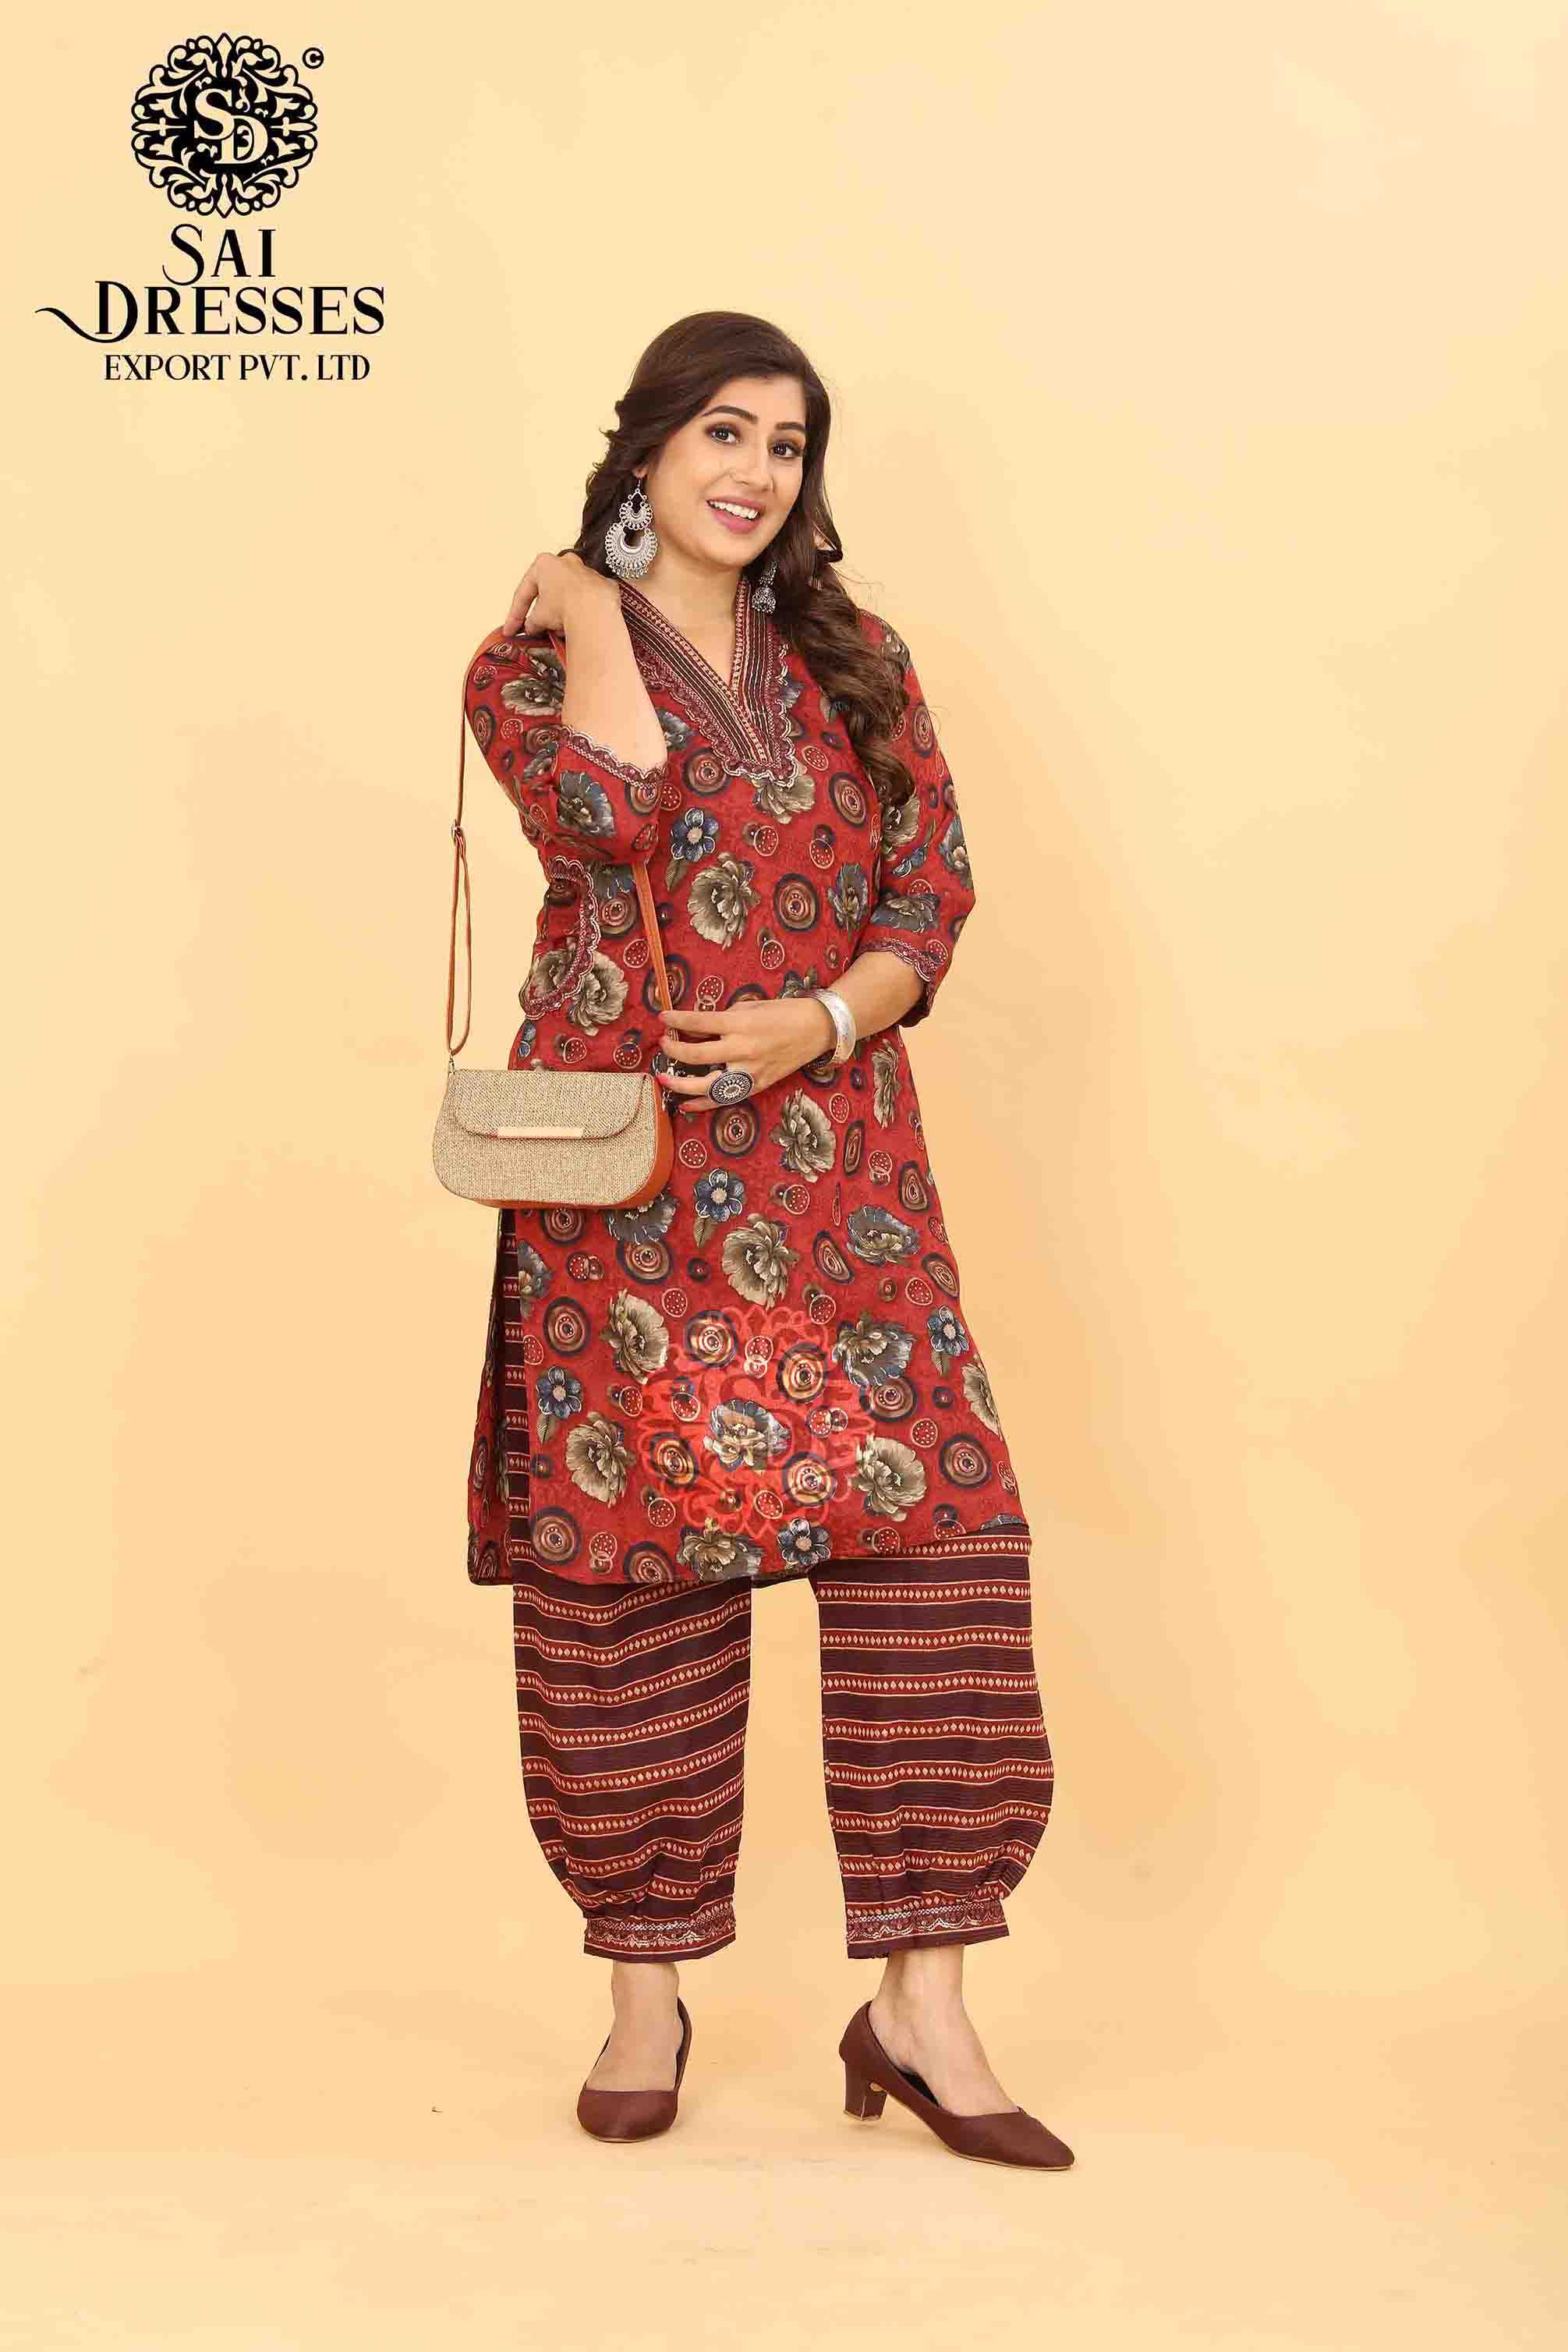 SAI DRESSES PRESENT D.NO SD 5013 READY TO EXCLUSIVE TRENDY WEAR PATHANI KURTA WITH AFGHANI PANT STYLE COMBO COLLECTION IN WHOLESALE RATE IN SURAT